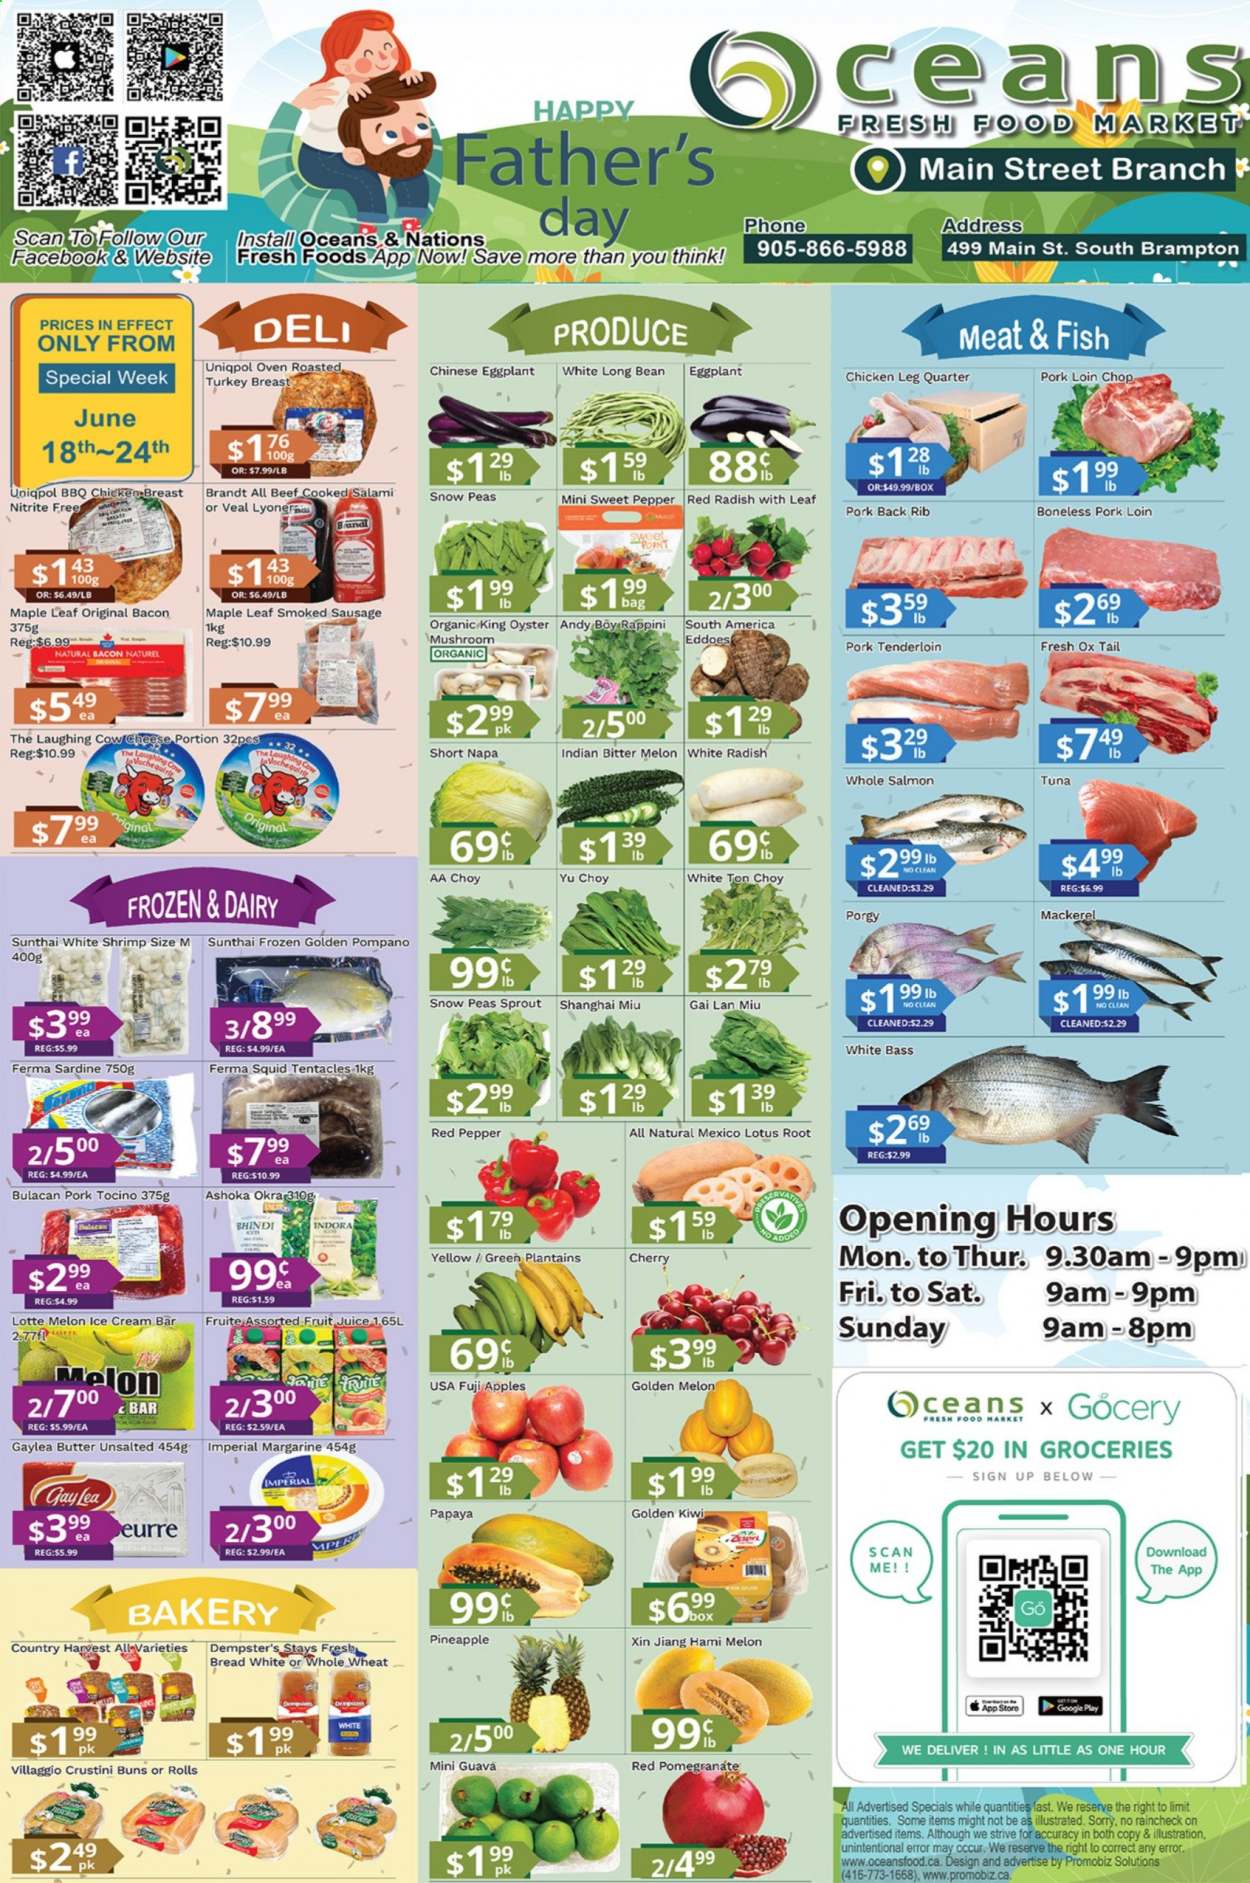 thumbnail - Oceans Flyer - June 18, 2021 - June 24, 2021 - Sales products - mushrooms, bread, buns, radishes, peas, okra, eggplant, white radish, guava, pineapple, plantains, cherries, Fuji apple, melons, pomegranate, mackerel, salmon, squid, tuna, oysters, pompano, fish, shrimps, bacon, salami, sausage, smoked sausage, cheese, The Laughing Cow, butter, margarine, ice cream, snow peas, Country Harvest, juice, fruit juice, chicken breasts, chicken legs, chicken, turkey, pork loin, pork meat, pork tenderloin, Lotus, kiwi. Page 1.